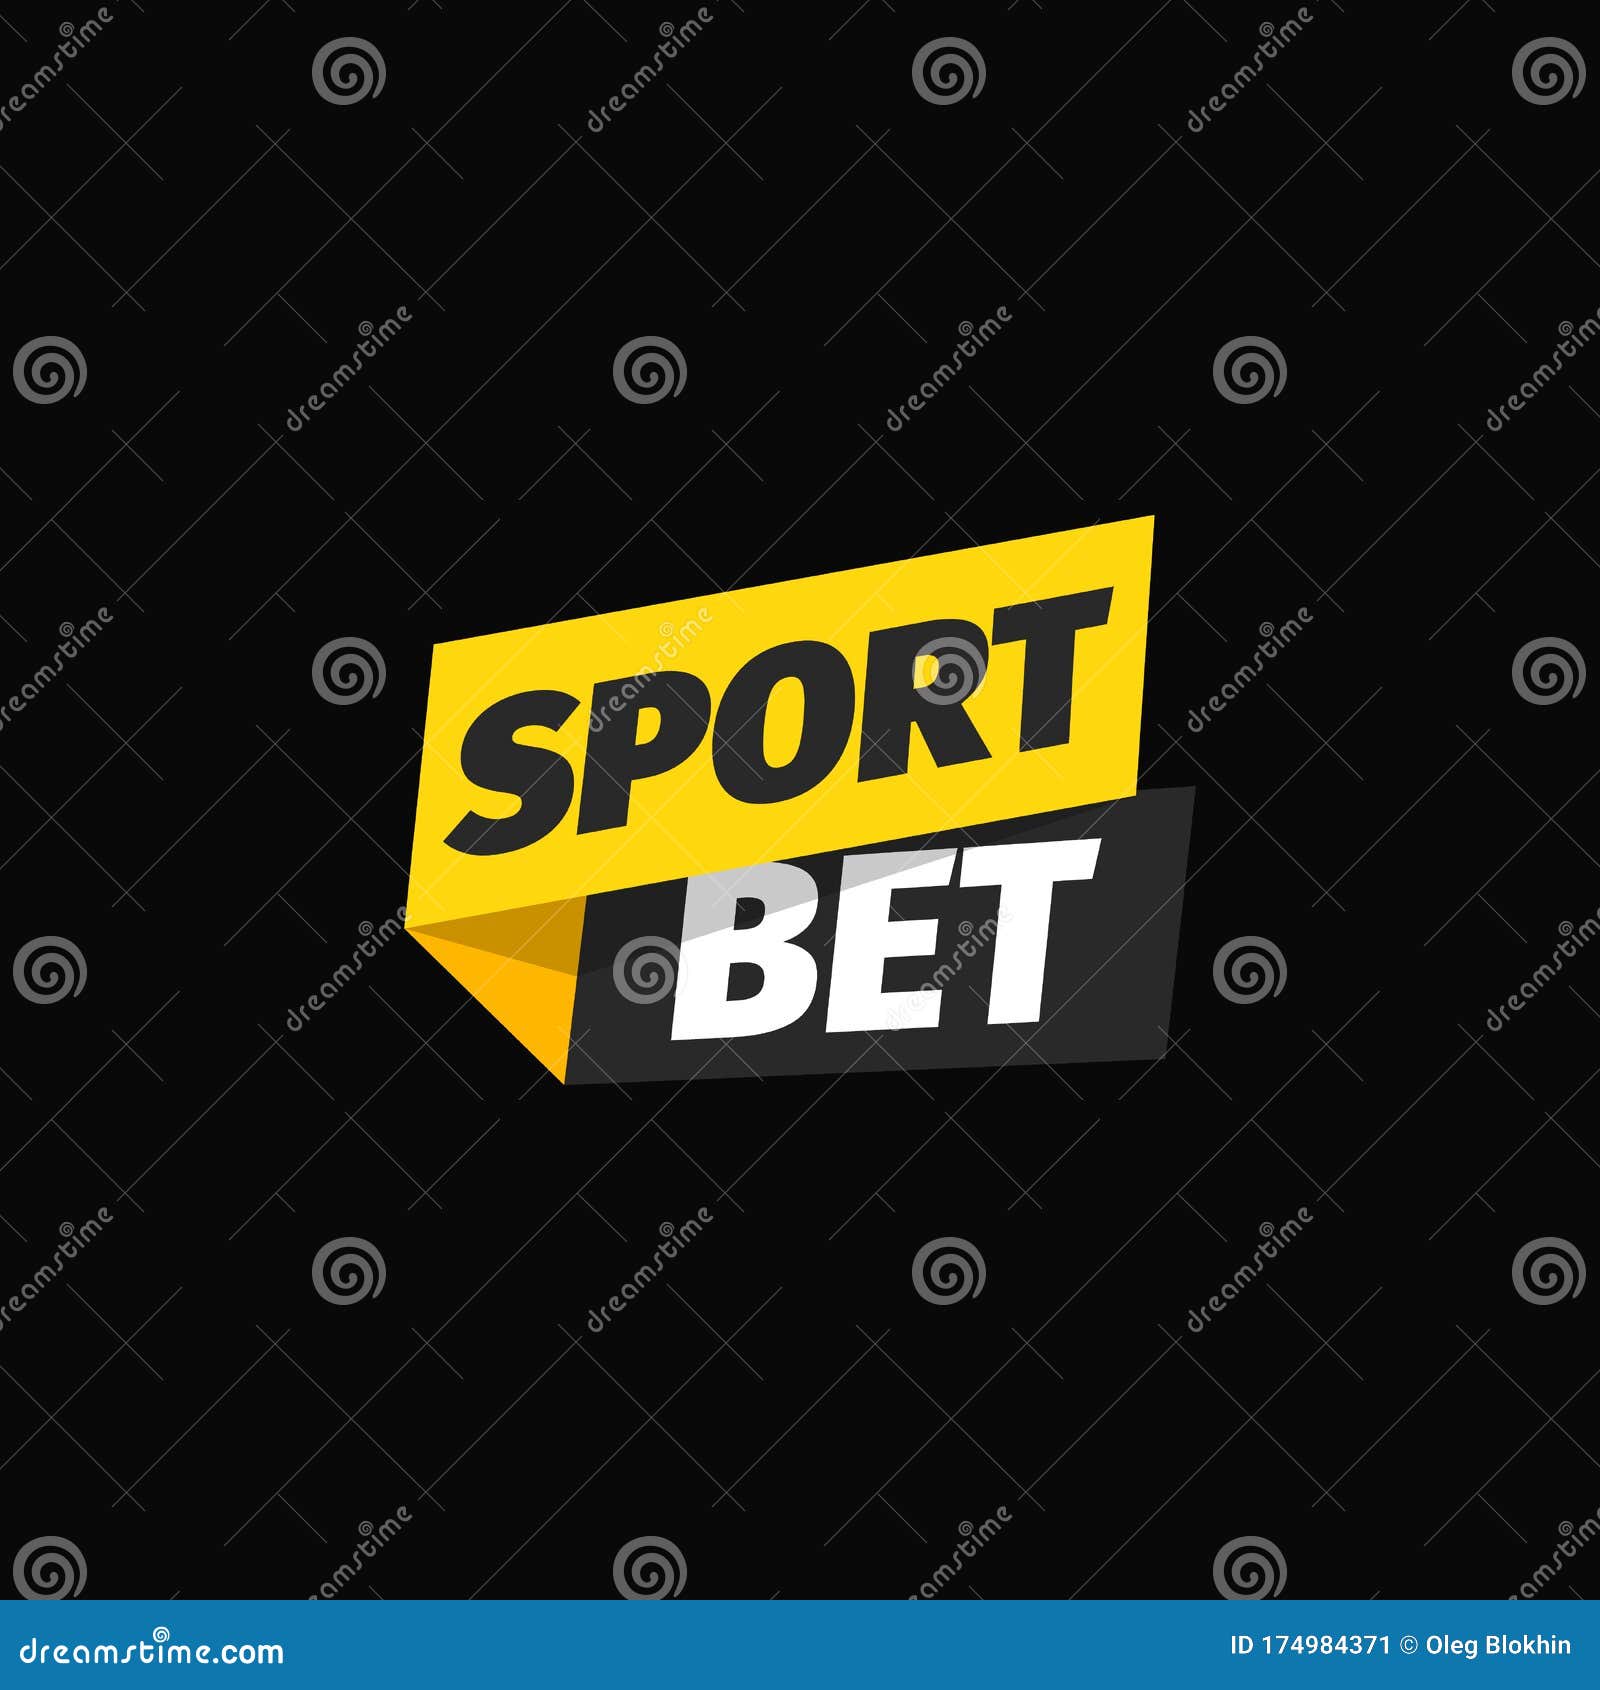 sport bet   icon. logo for online betting. bookmaker sign on dark background